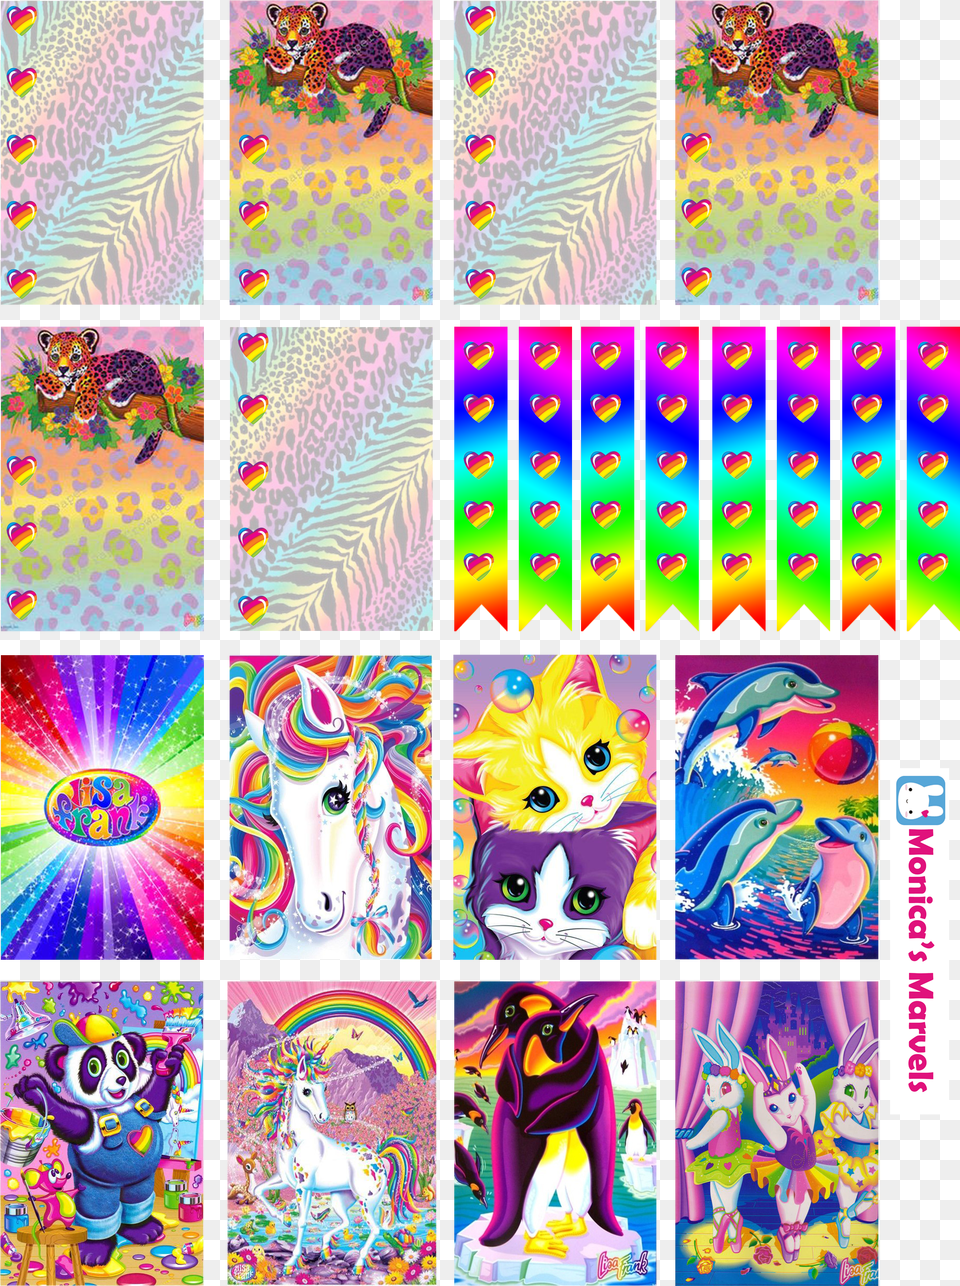 Quotsticker Kitquot Lisa Frank Full Boxes Sticker Rainbow Unicorn Rainbow Unicorn Rainbow Unicorn Beach Free Png